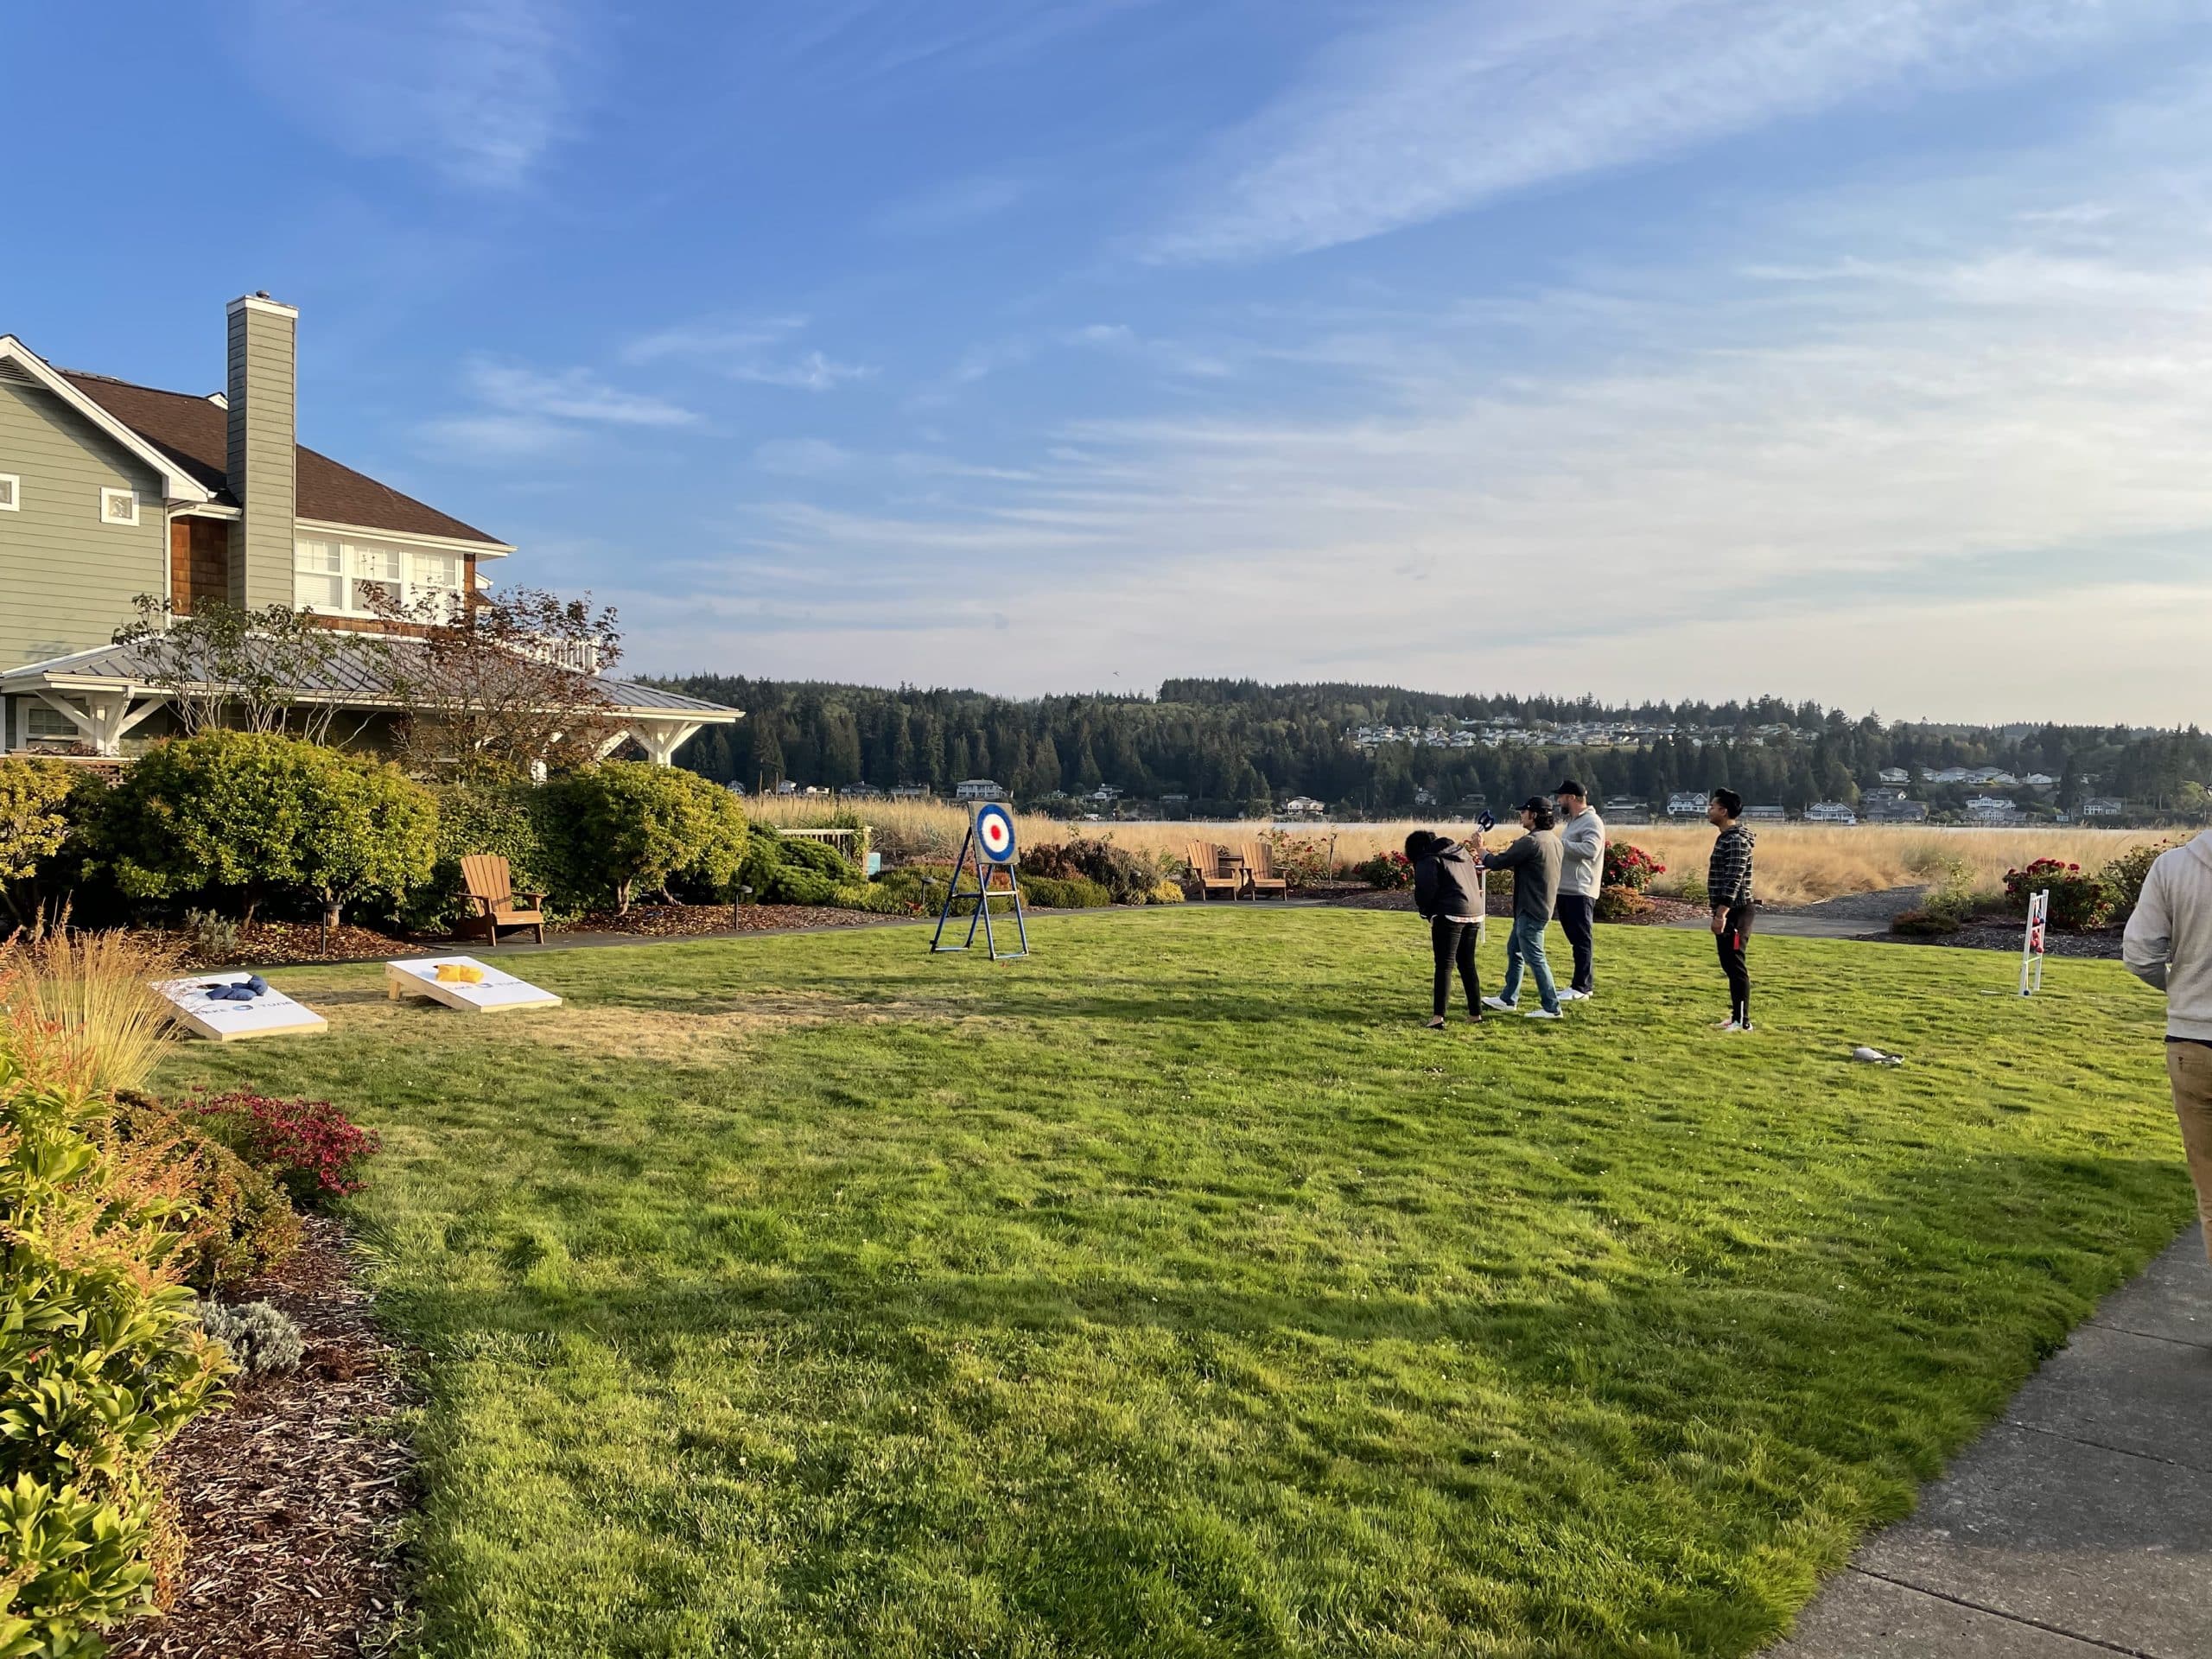 The final rays of the sun shining down on the lawn at the Inn in Port Ludlow, where TUNE's 2022 retreat was held